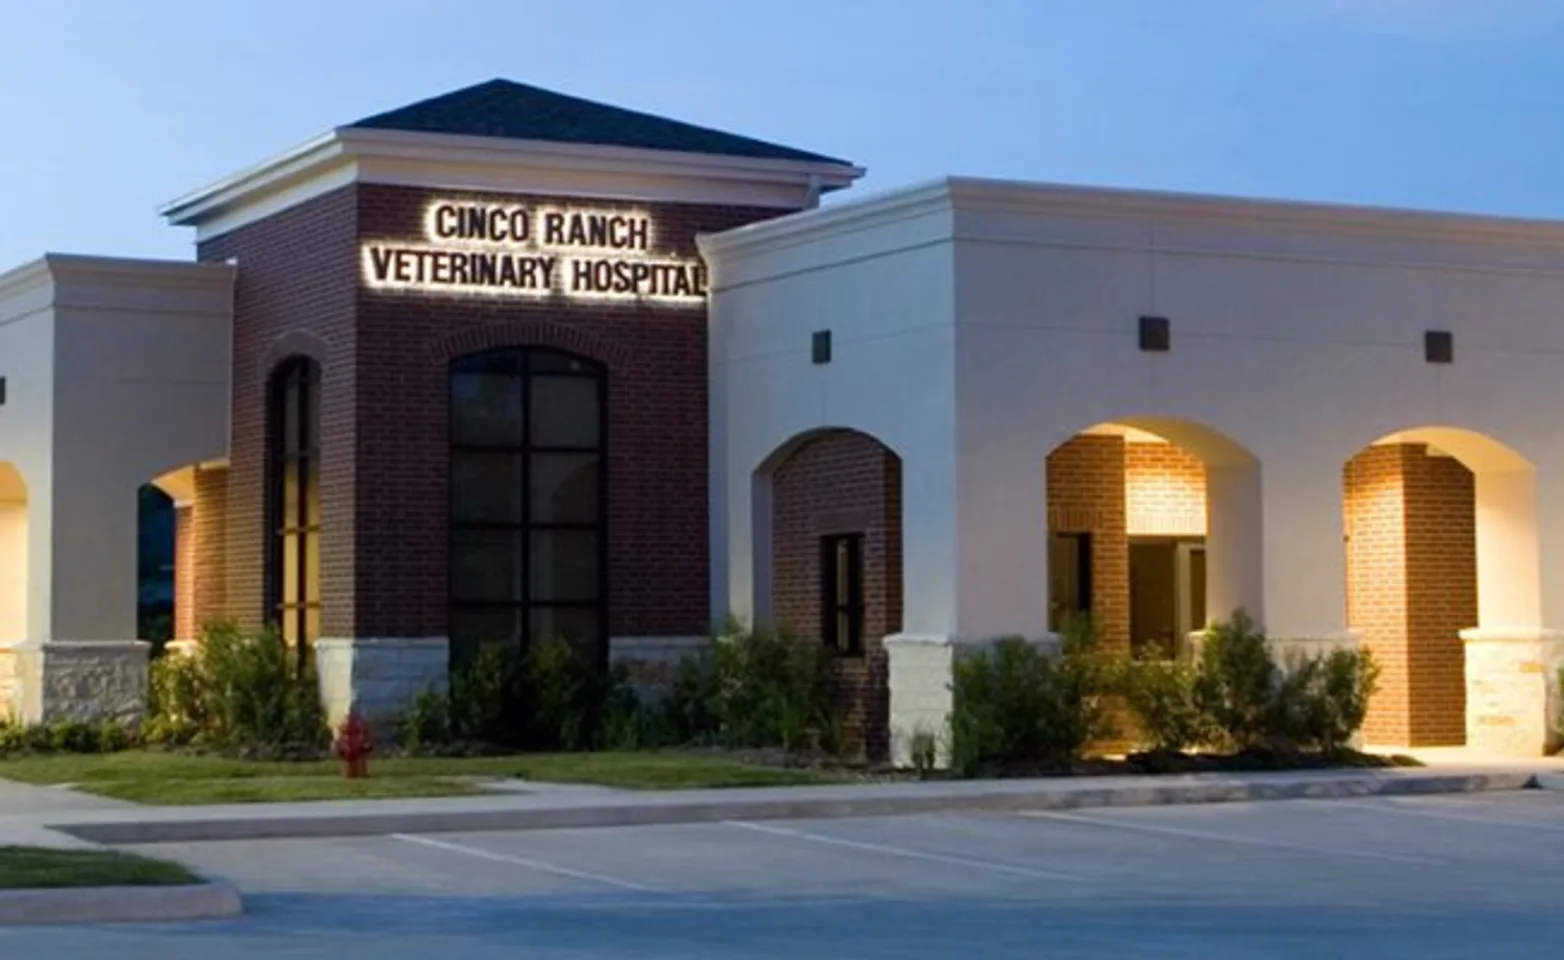 A photo of the building exterior of Cinco Ranch Veterinary Hospital at dusk